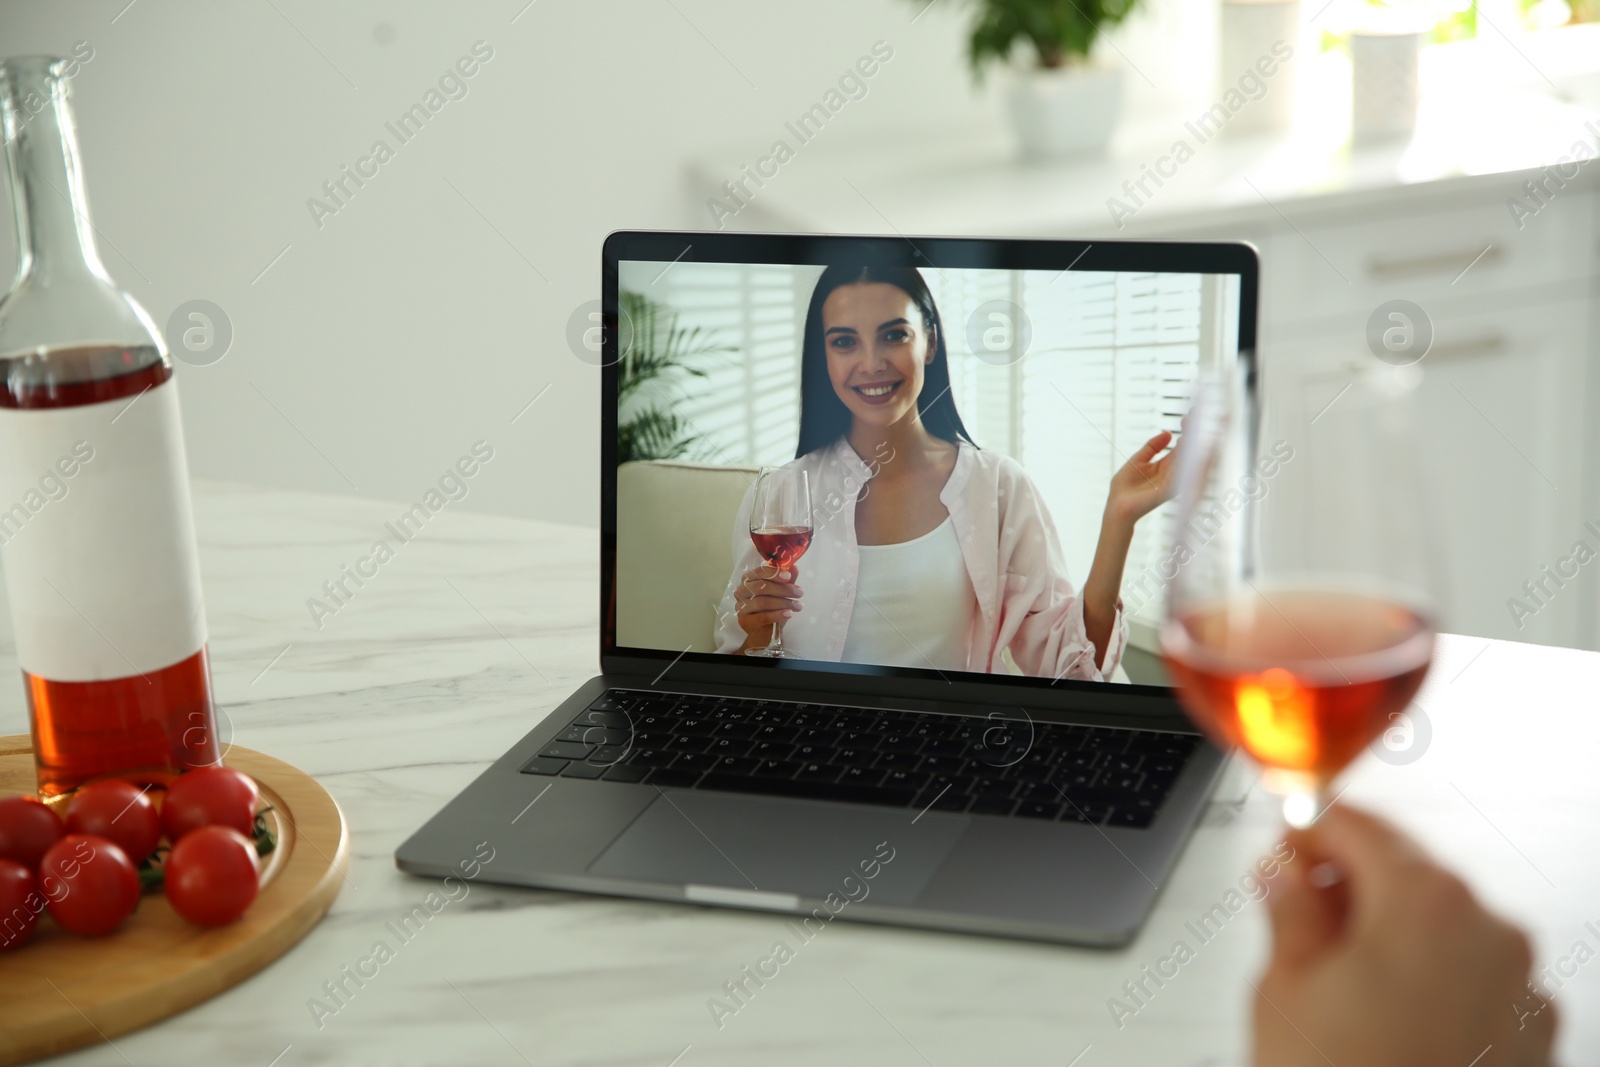 Photo of Friends drinking wine while communicating through online video conference in kitchen. Social distancing during coronavirus pandemic